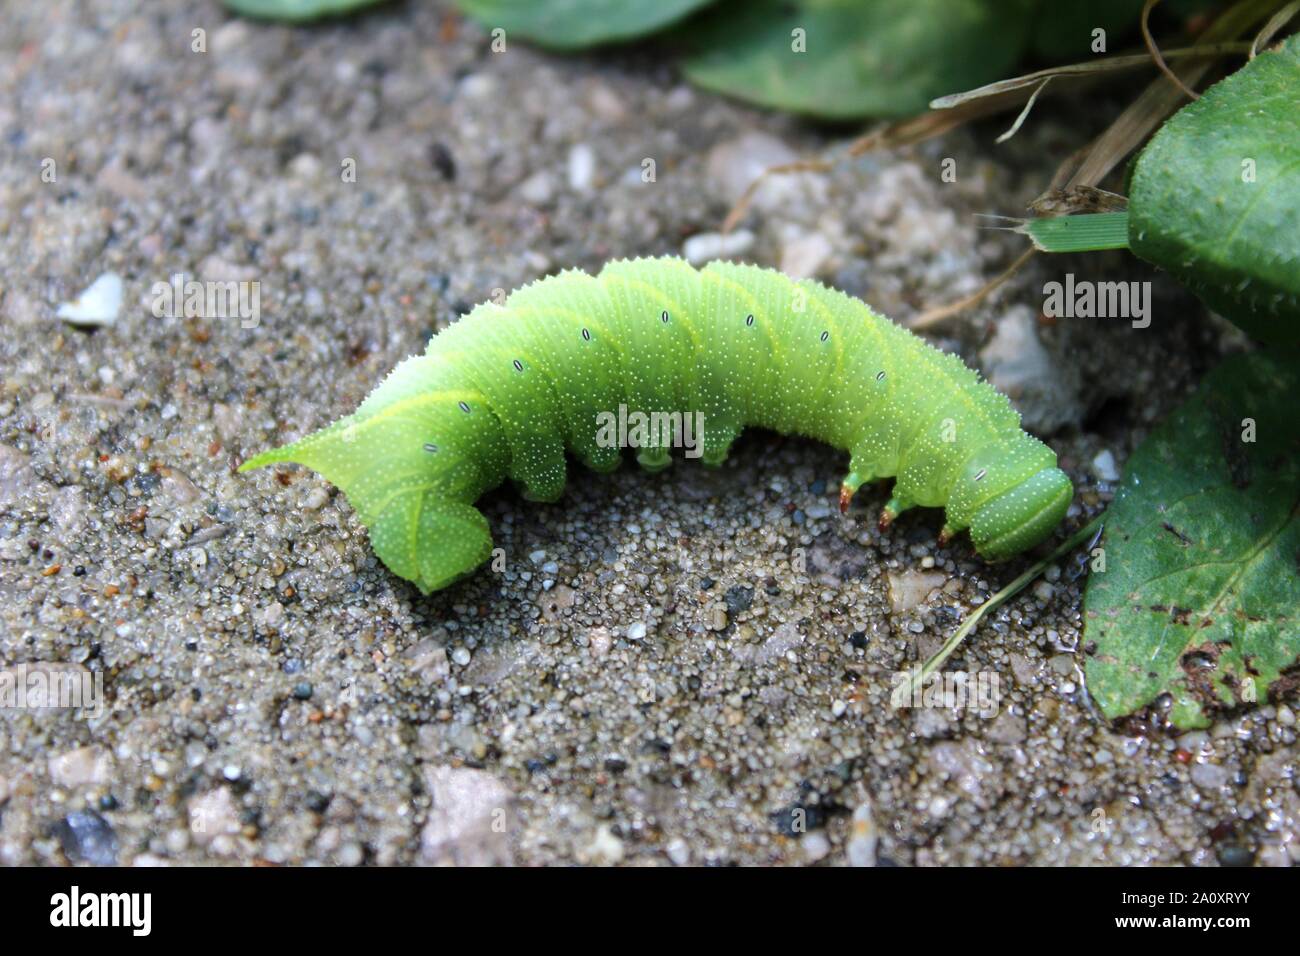 A Tomato Worm Crossing The Sidewalk Stock Photo